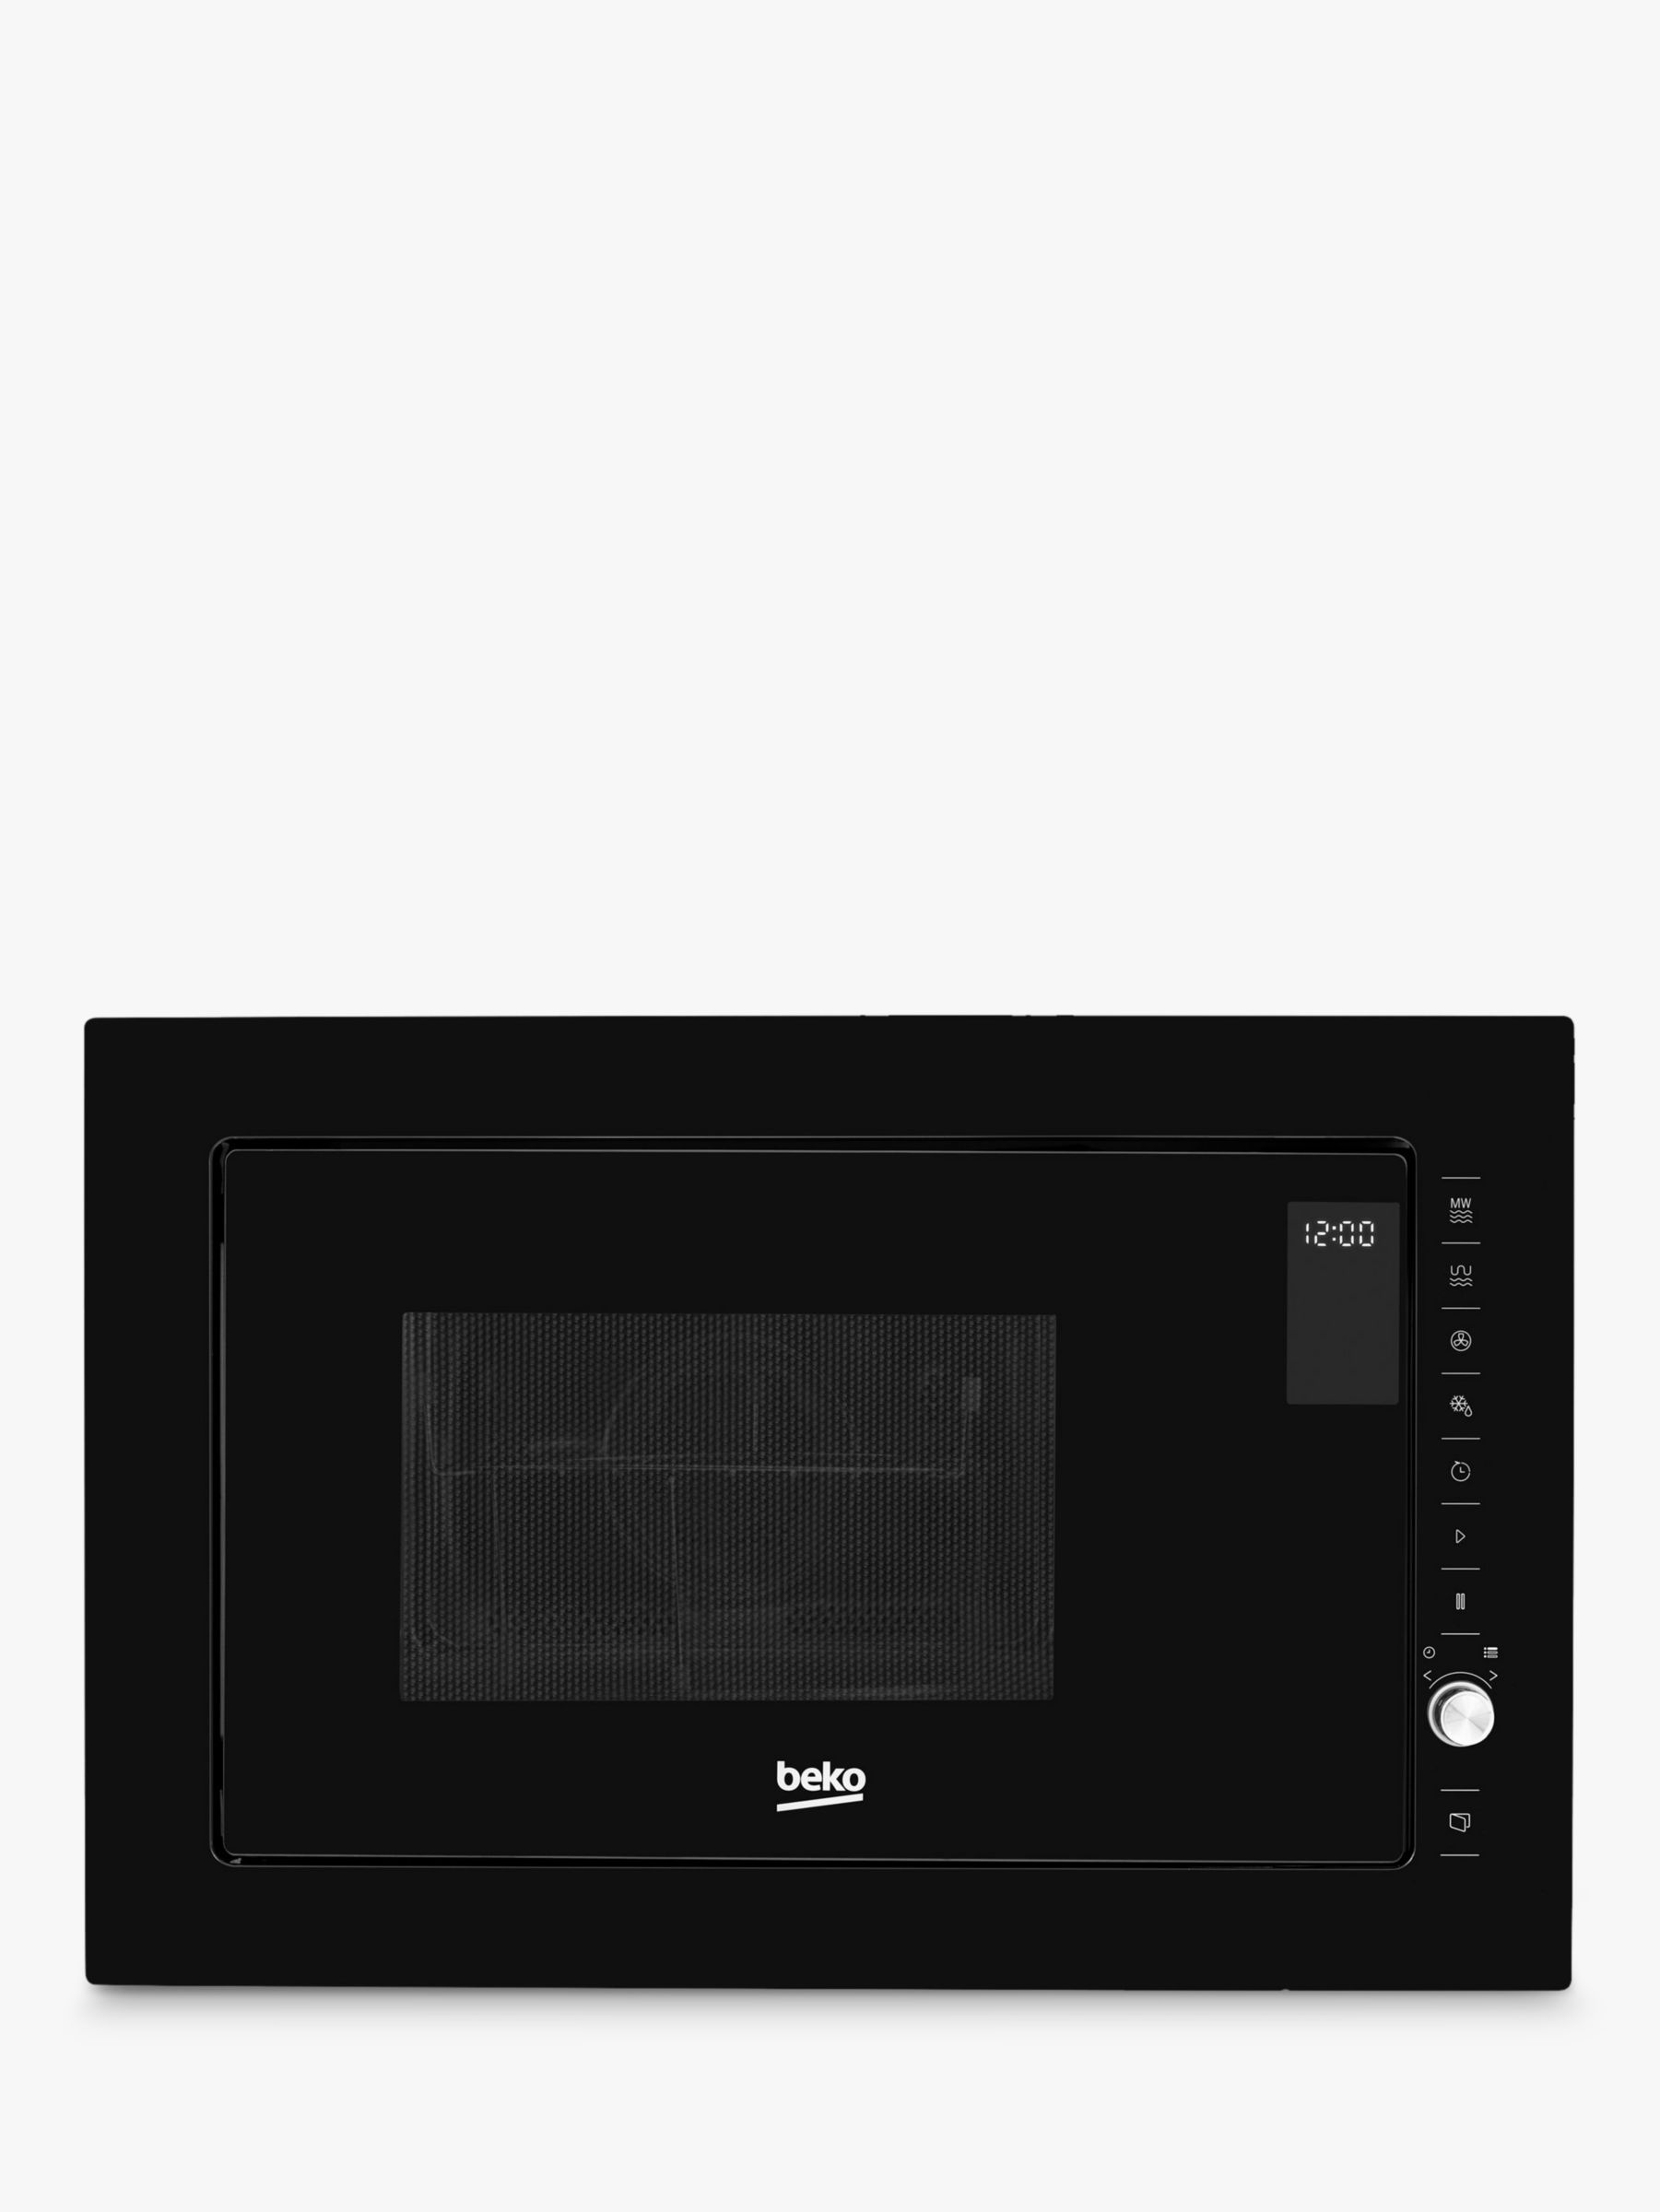 Beko MCB25433BG Built-In Microwave with Grill, Black